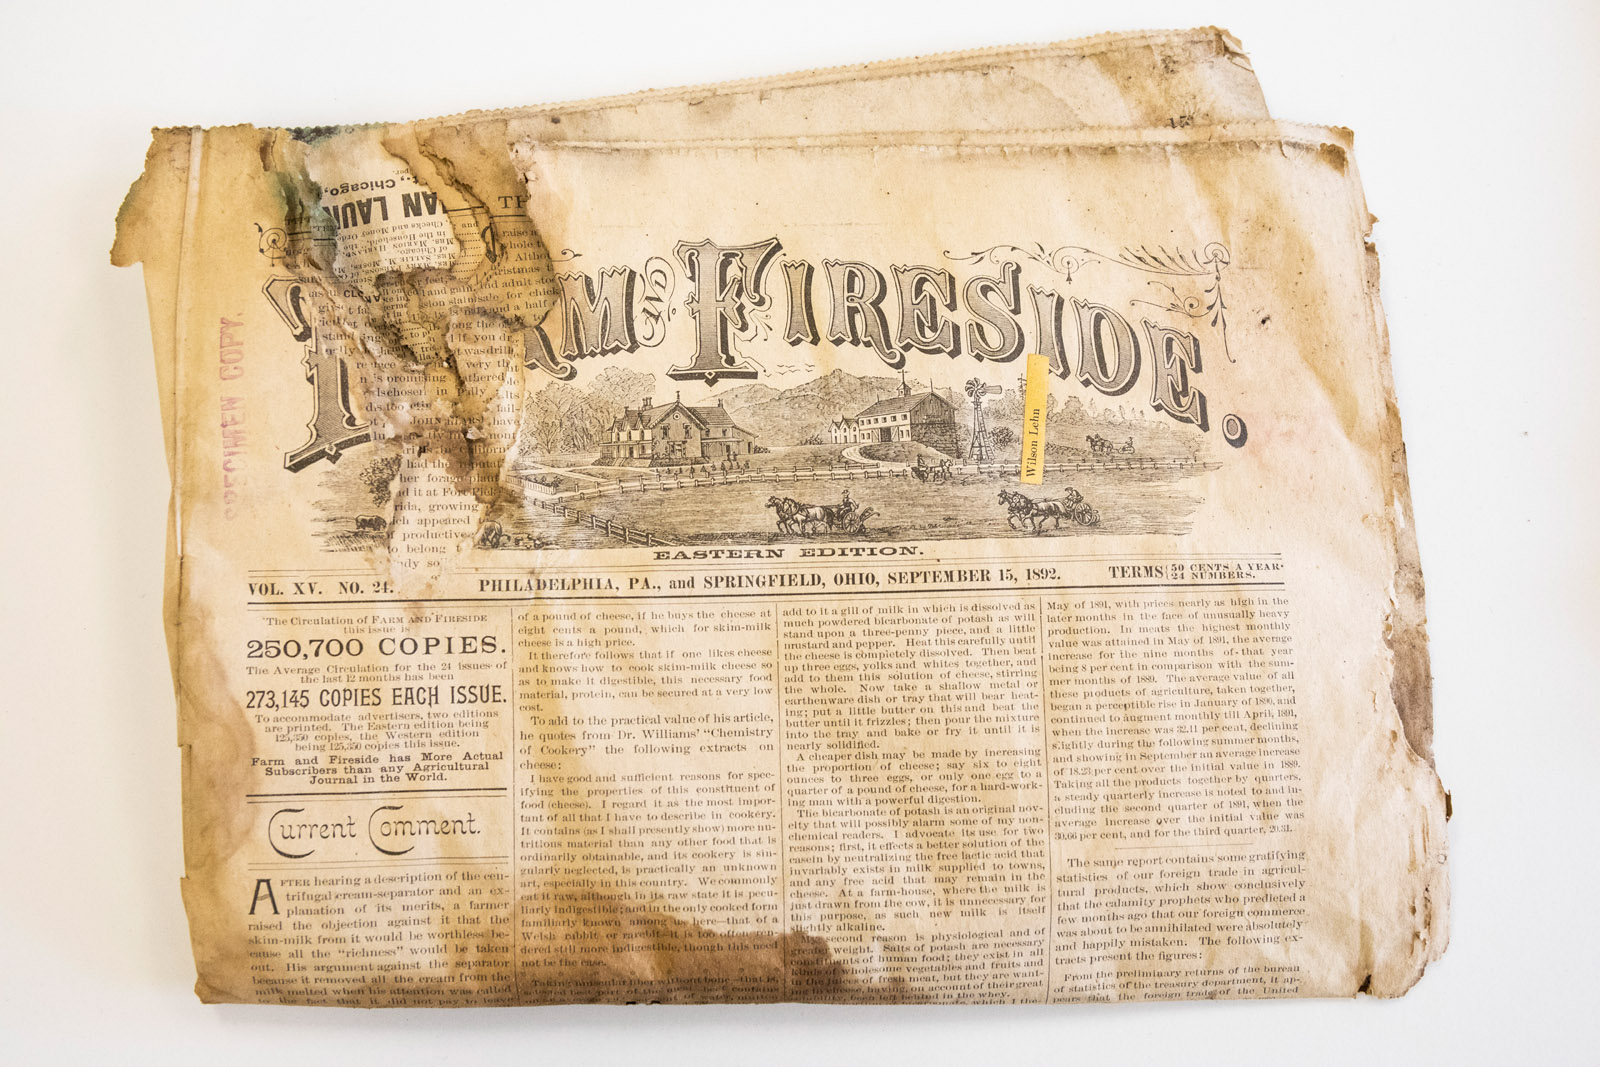 Pictured: A periodical from Springfield, Ohio. Ella Axelrod has spent months investigating, cataloging and digging into the mysteries of a buried box of odd treasures from the late 1800s and early 1900s as a part of their Summer Collaborative Research.